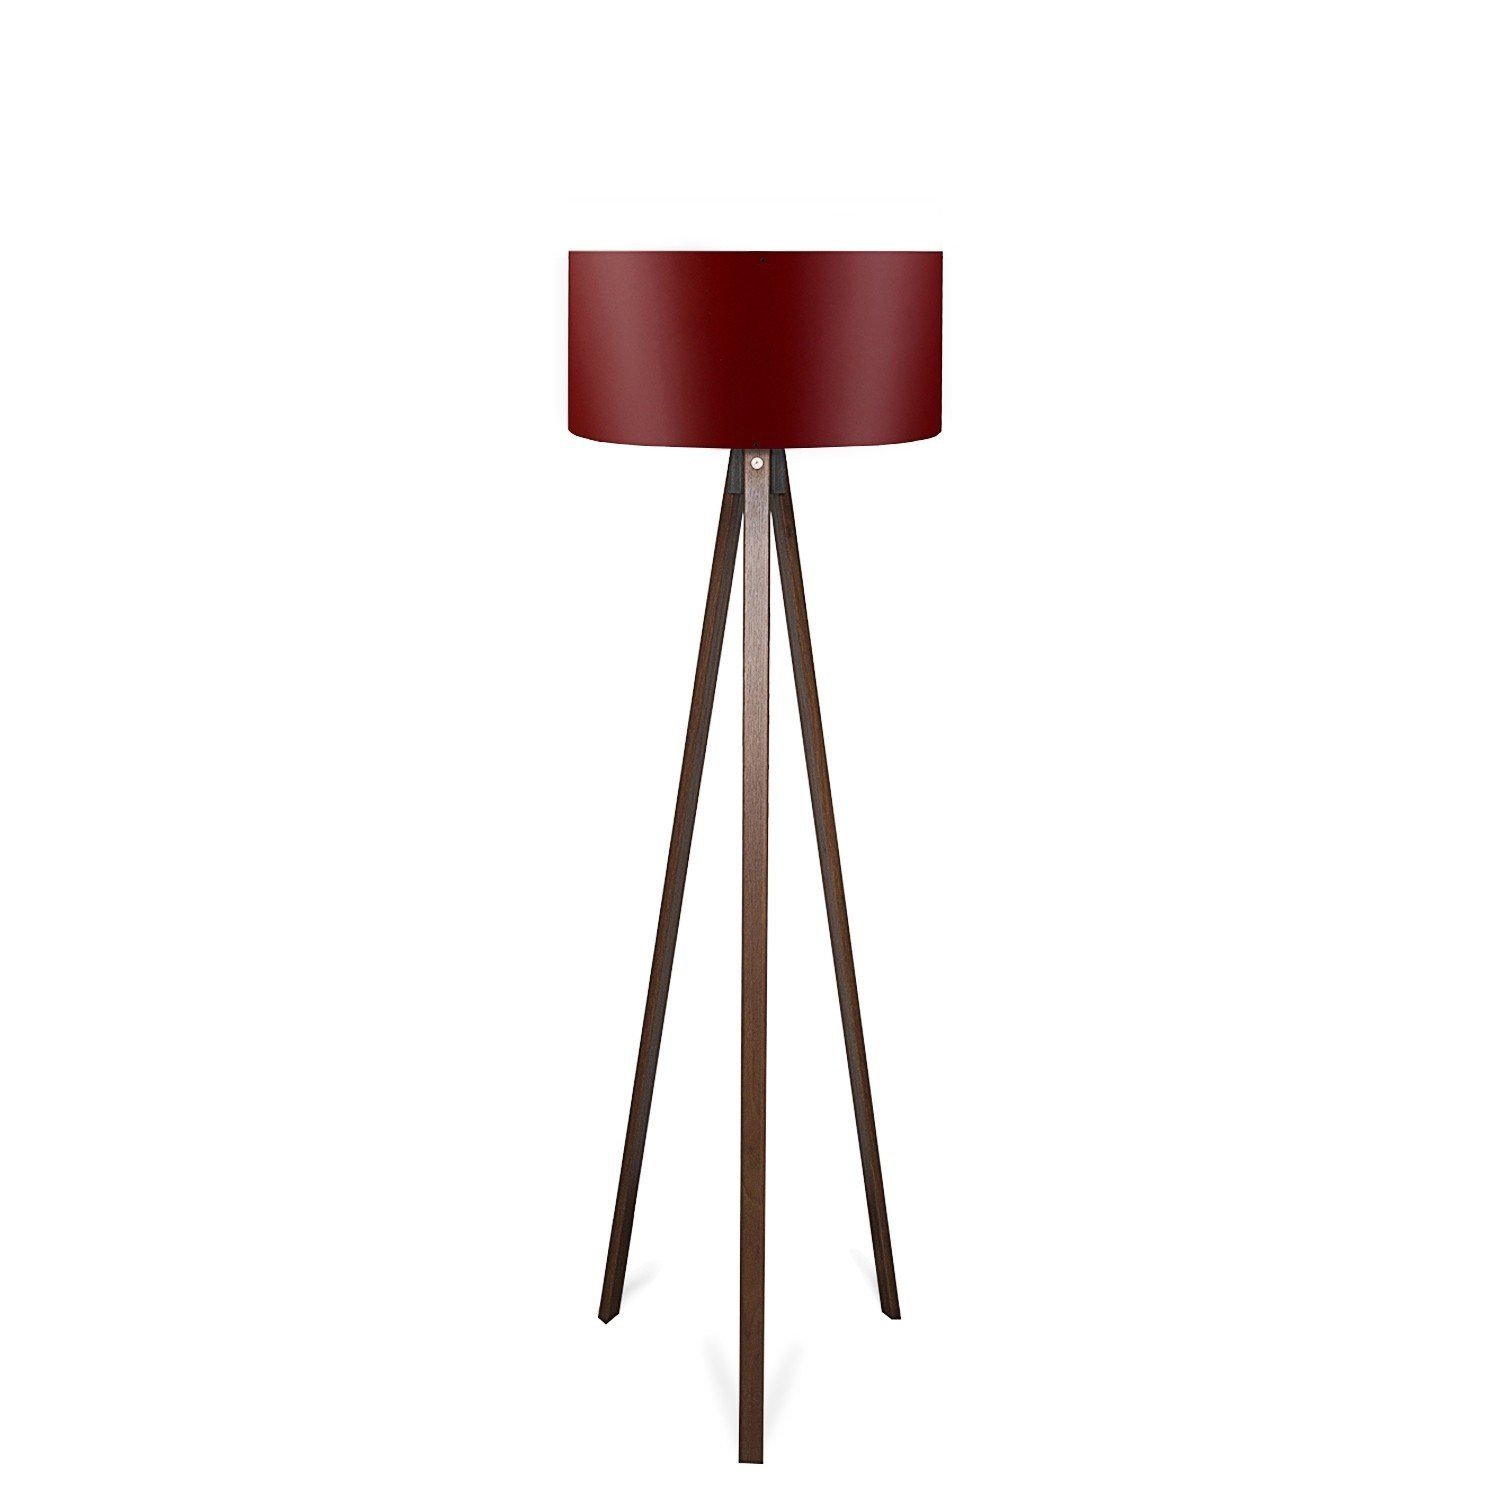 Opviq Stehlampe AYD SGN, MDF Claret,Red, 100